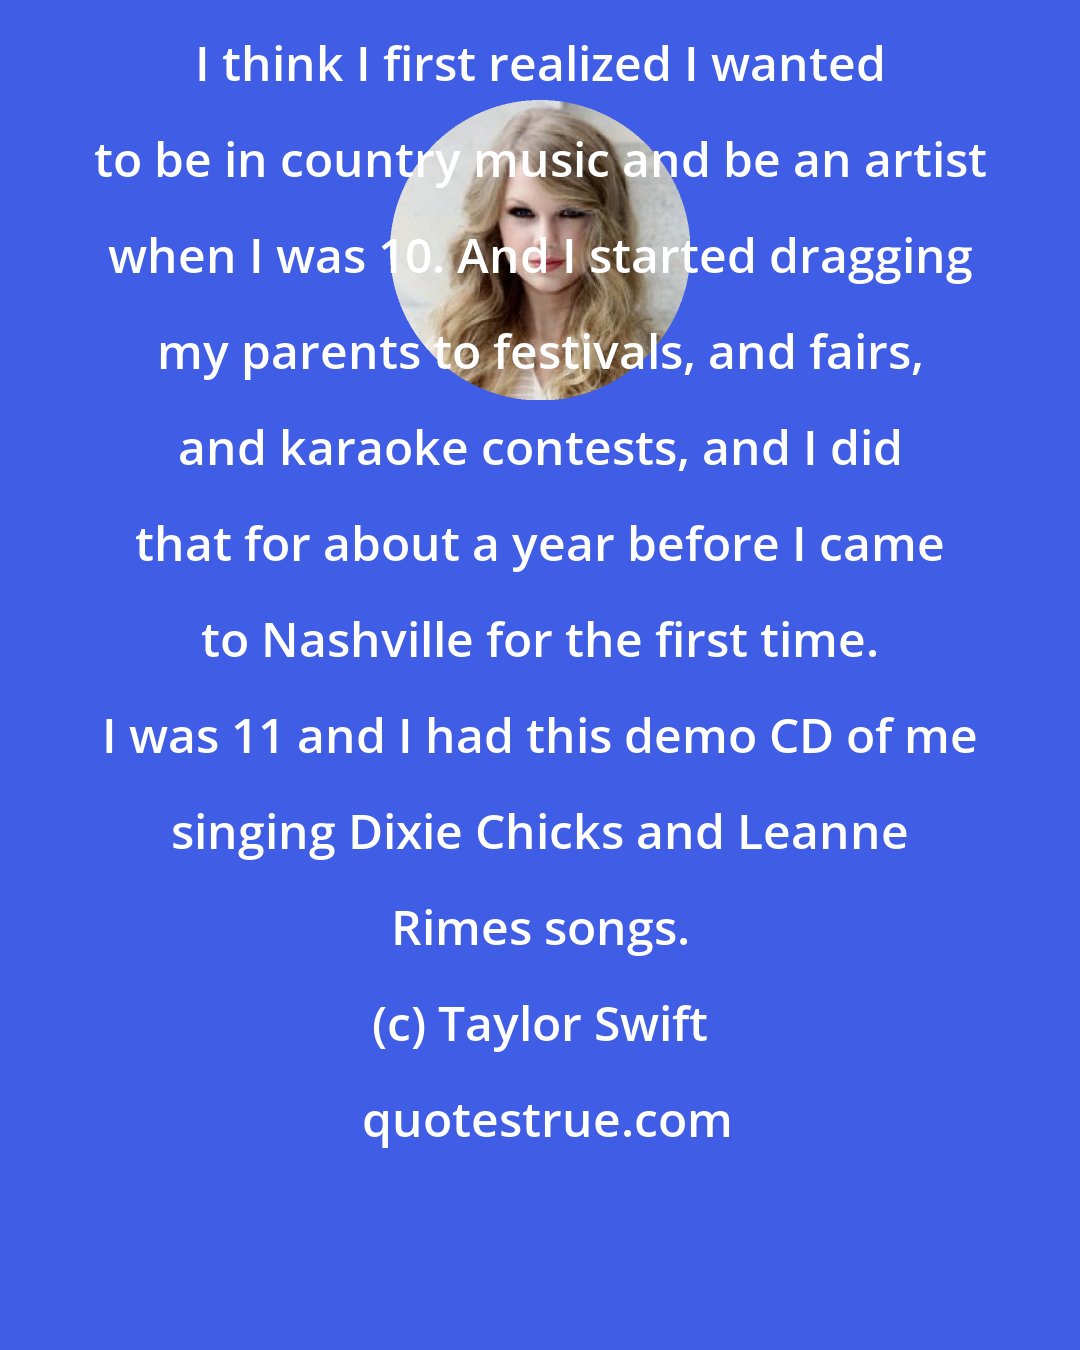 Taylor Swift: I think I first realized I wanted to be in country music and be an artist when I was 10. And I started dragging my parents to festivals, and fairs, and karaoke contests, and I did that for about a year before I came to Nashville for the first time. I was 11 and I had this demo CD of me singing Dixie Chicks and Leanne Rimes songs.